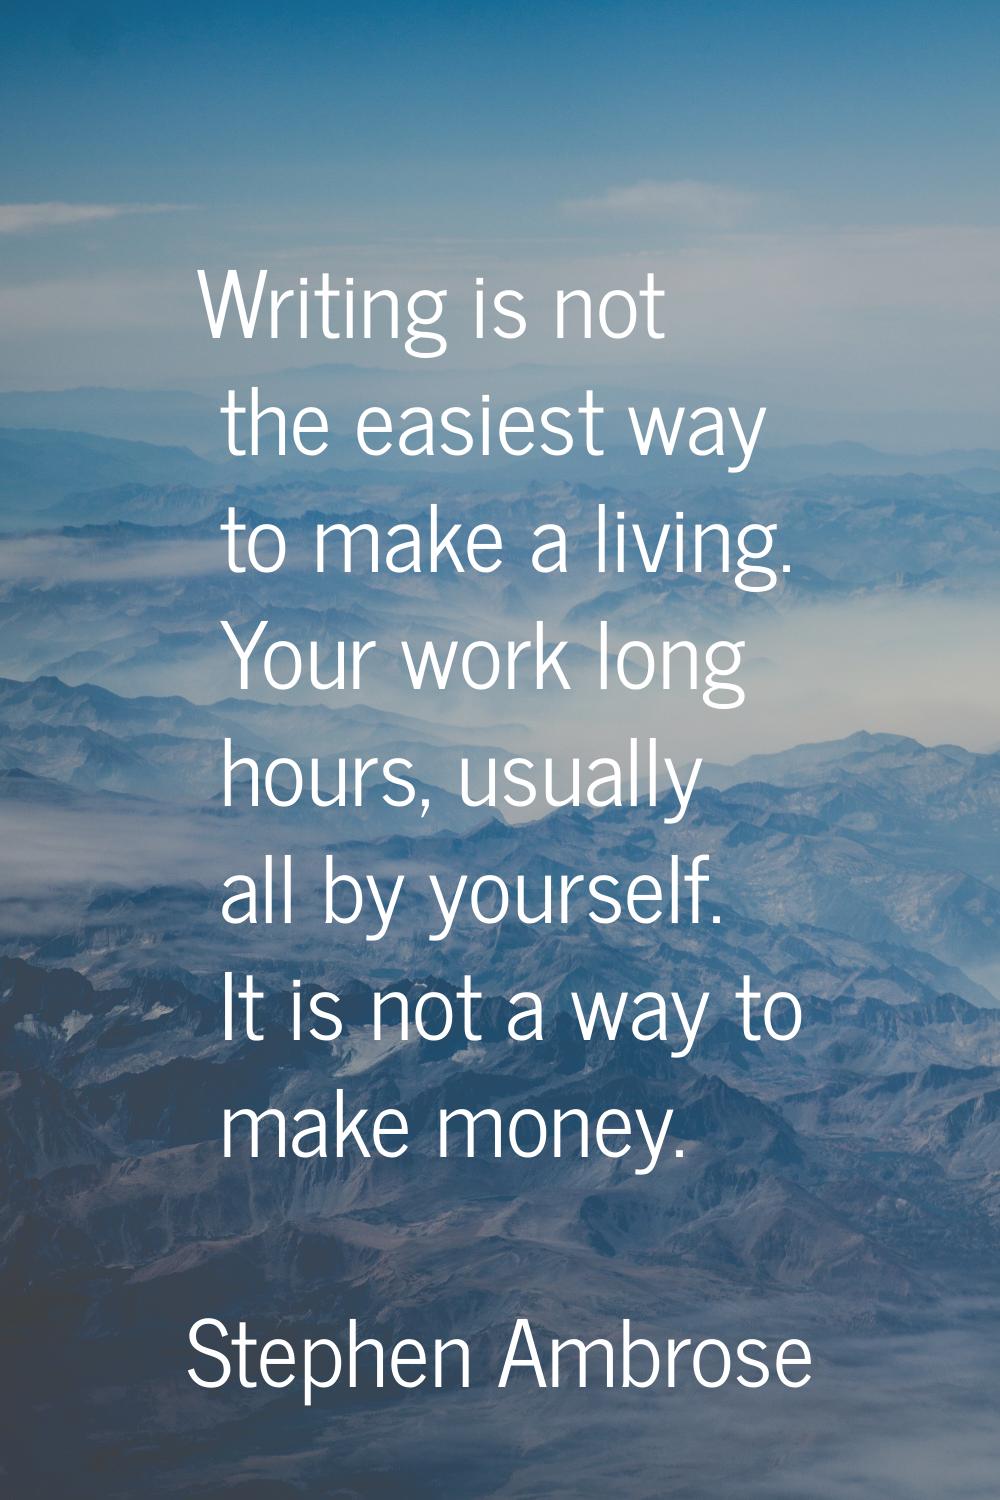 Writing is not the easiest way to make a living. Your work long hours, usually all by yourself. It 